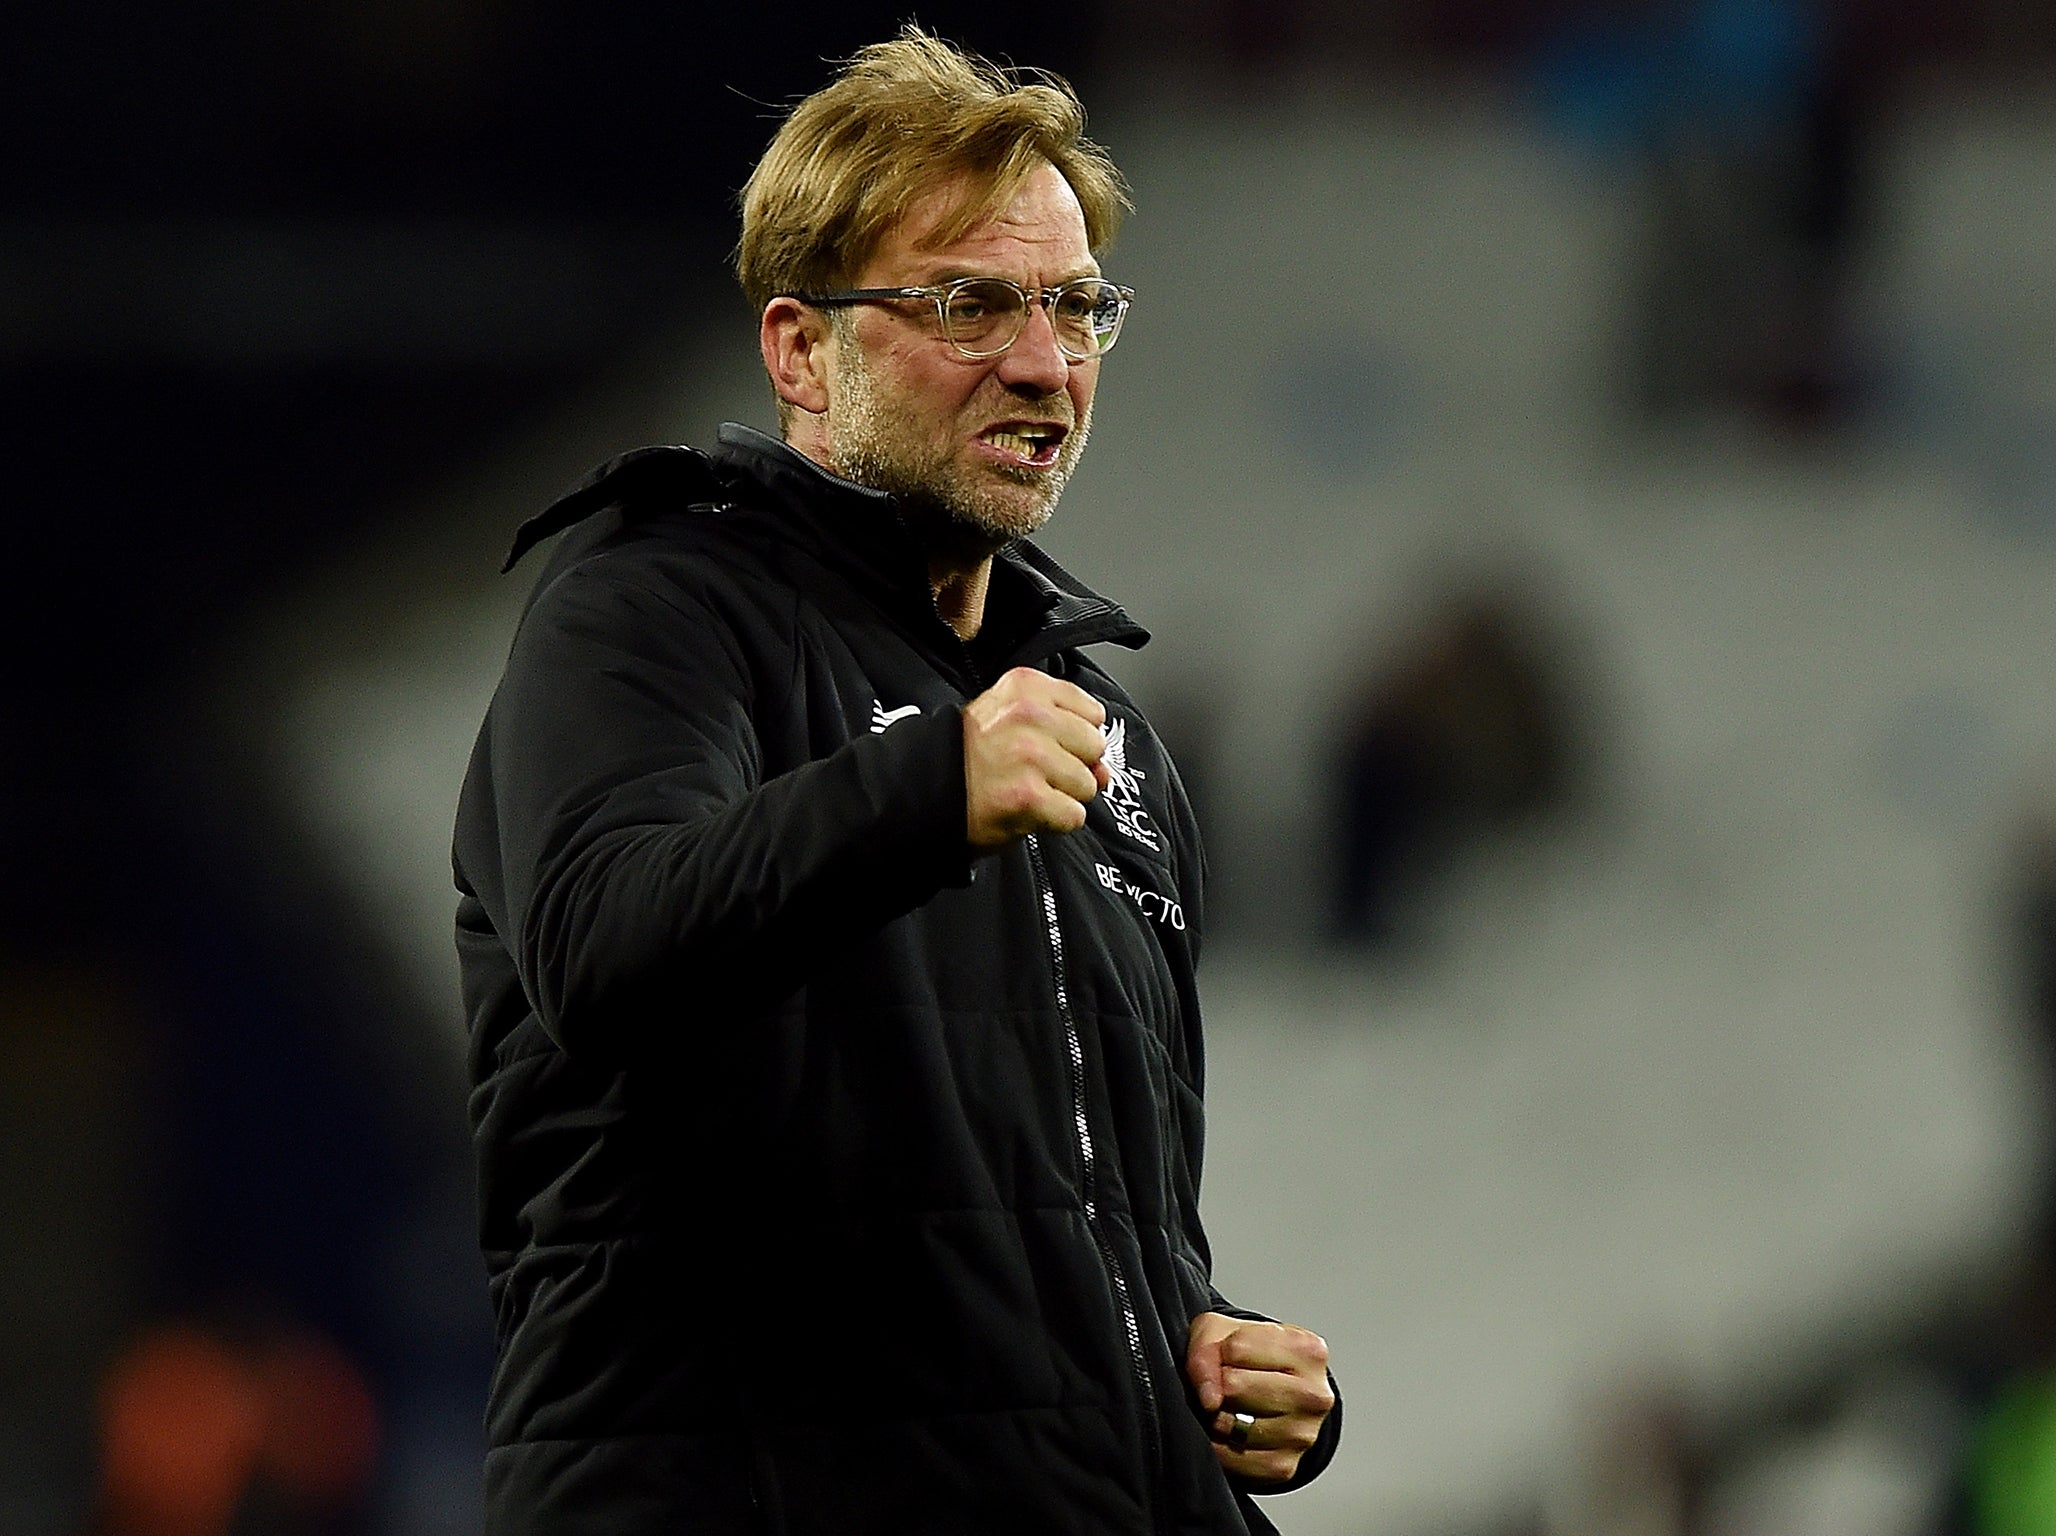 Klopp is back in business after being admitted to a local hospital this week